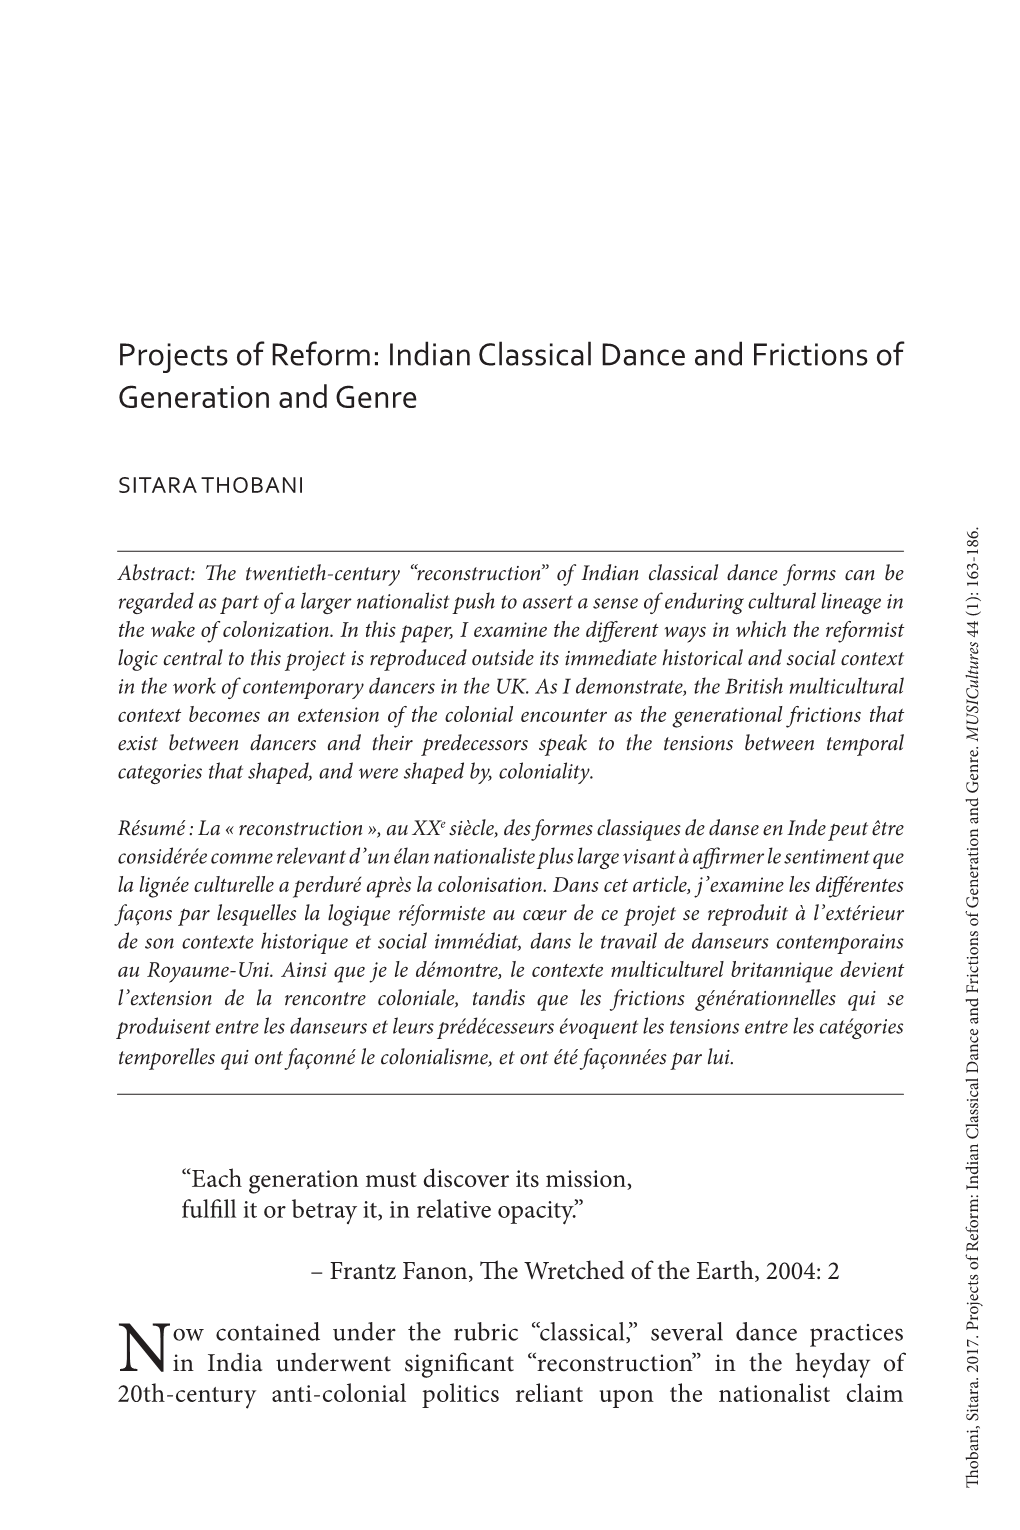 Indian Classical Dance and Frictions of Generation and Genre